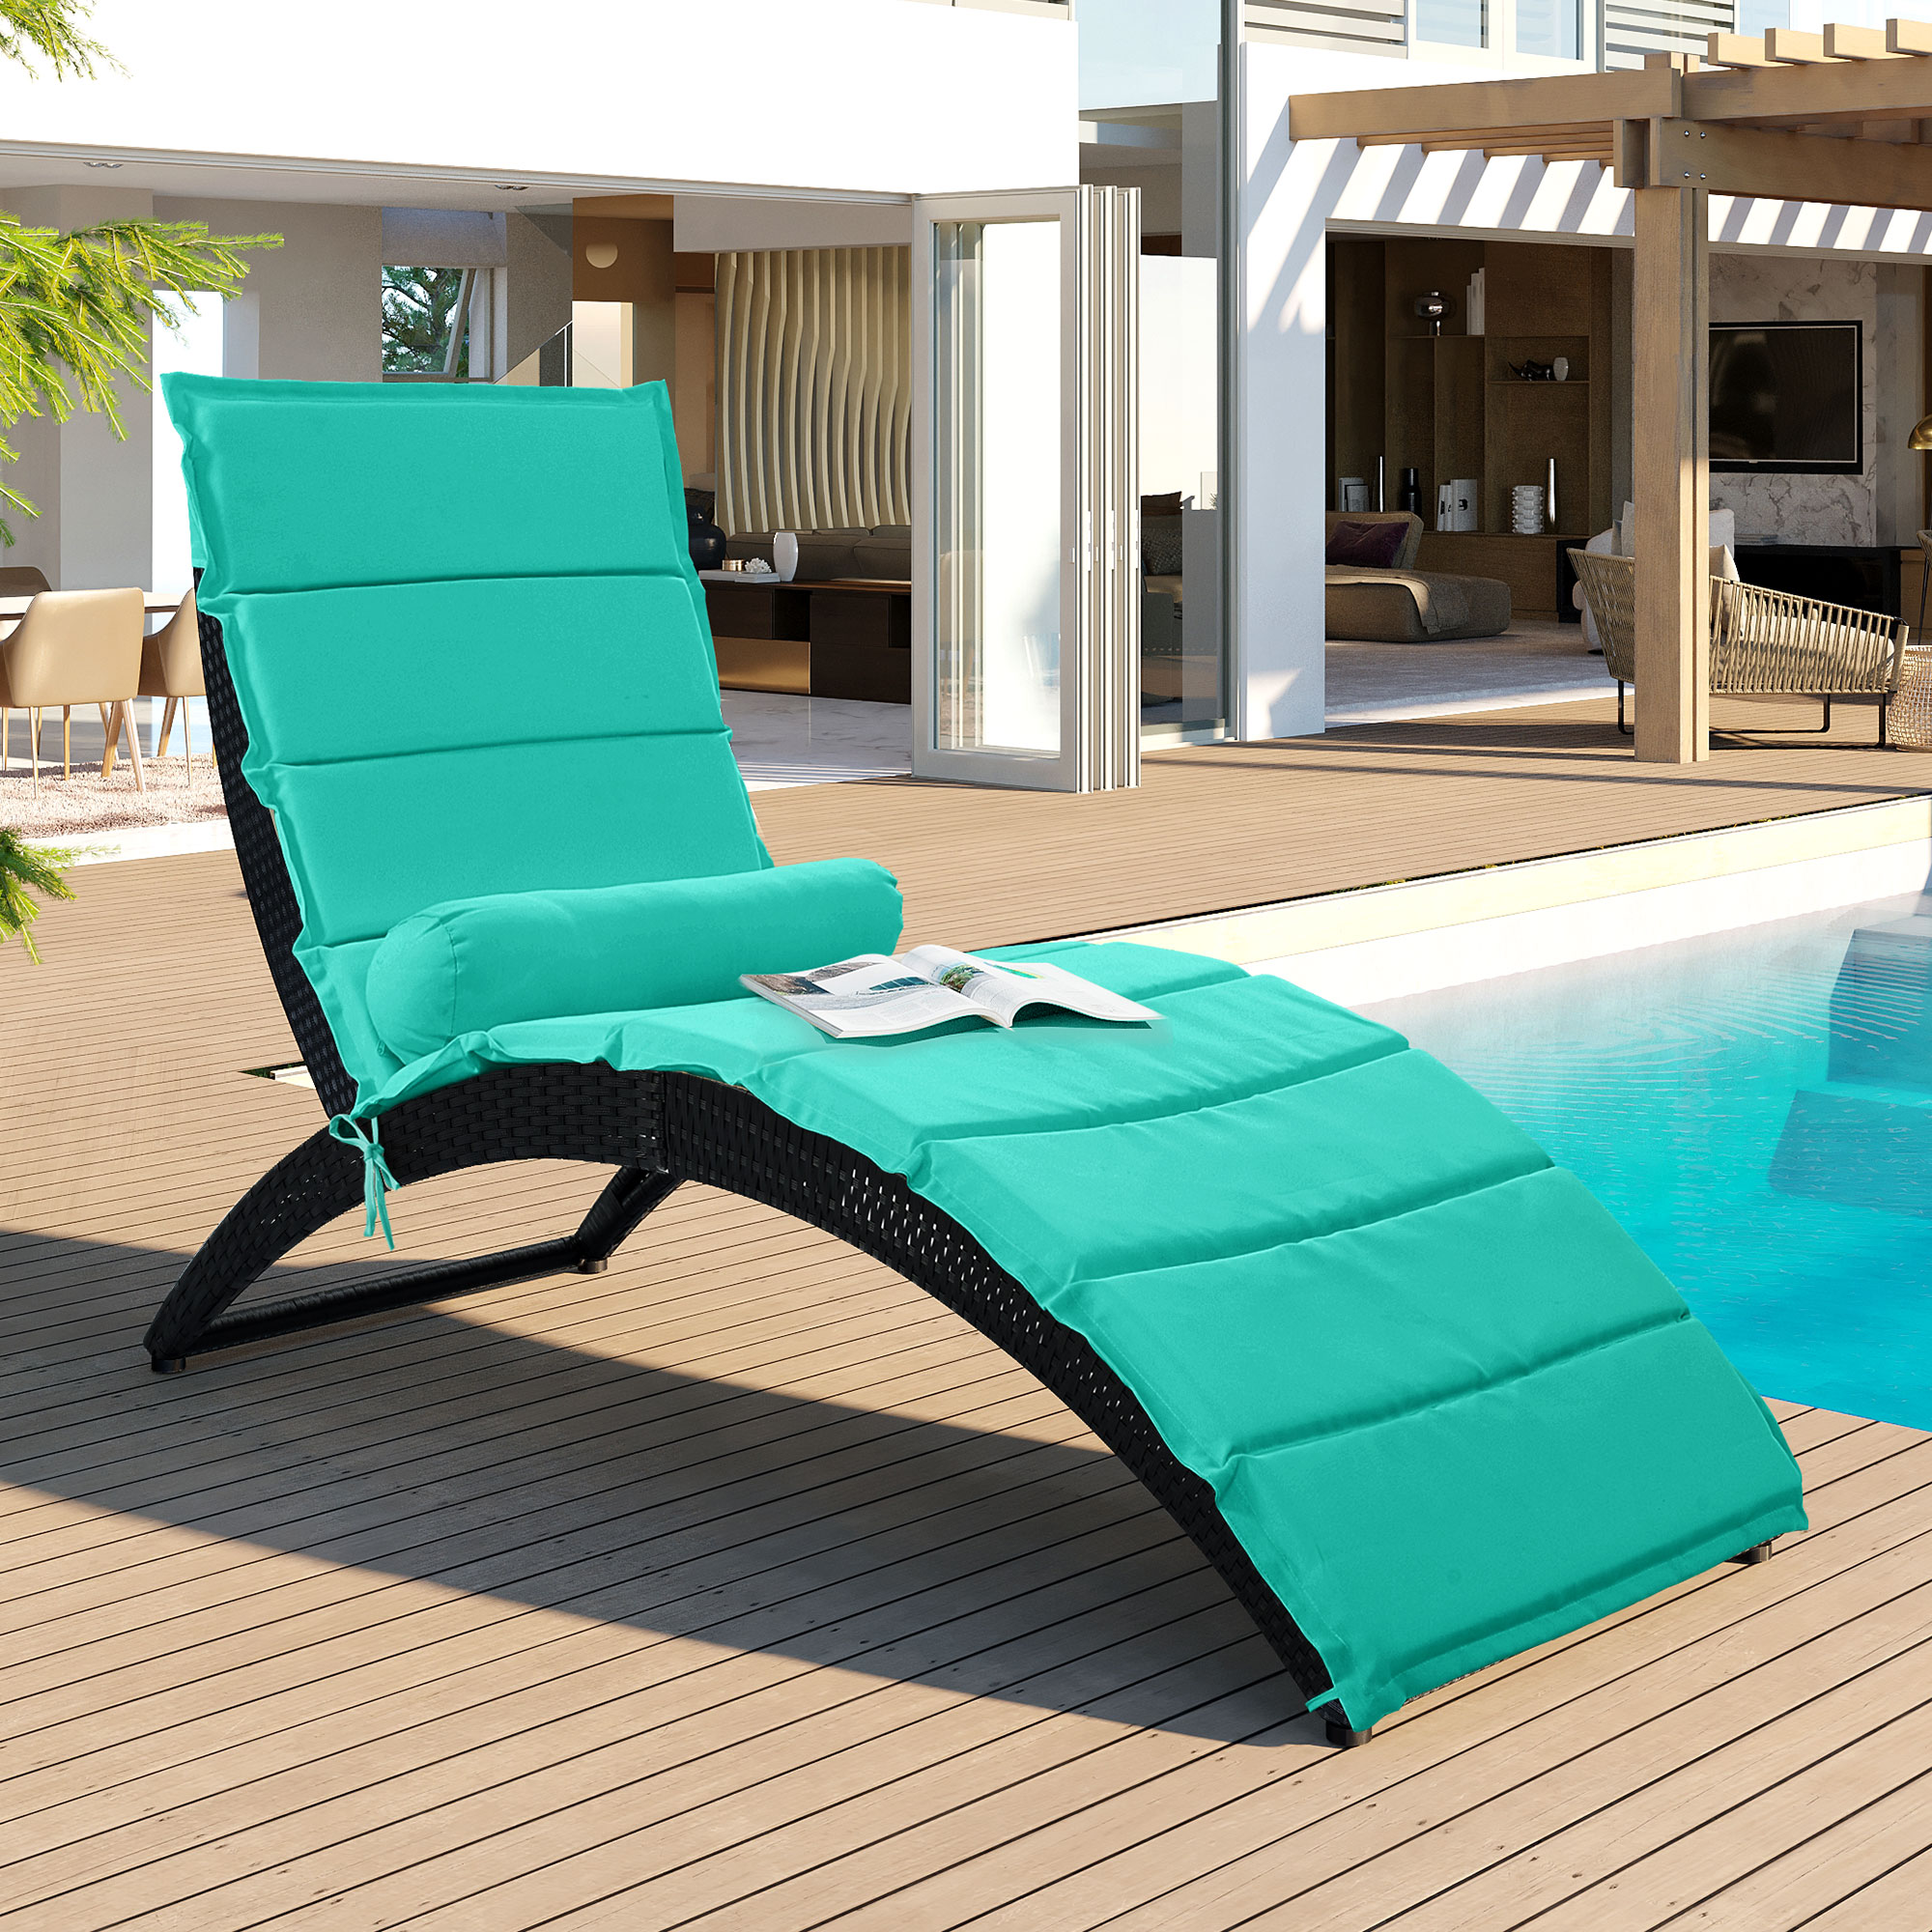 BTMWAY Outdoor Wicker Chaise Lounge, All-Weather Rattan Lounge Chair with Cushion and Head Pillow, Patio Furniture Sun Lounger Foldable Chaise Lounger, Folding Sunbed Tanning Recliner for Beach Pool - image 1 of 11